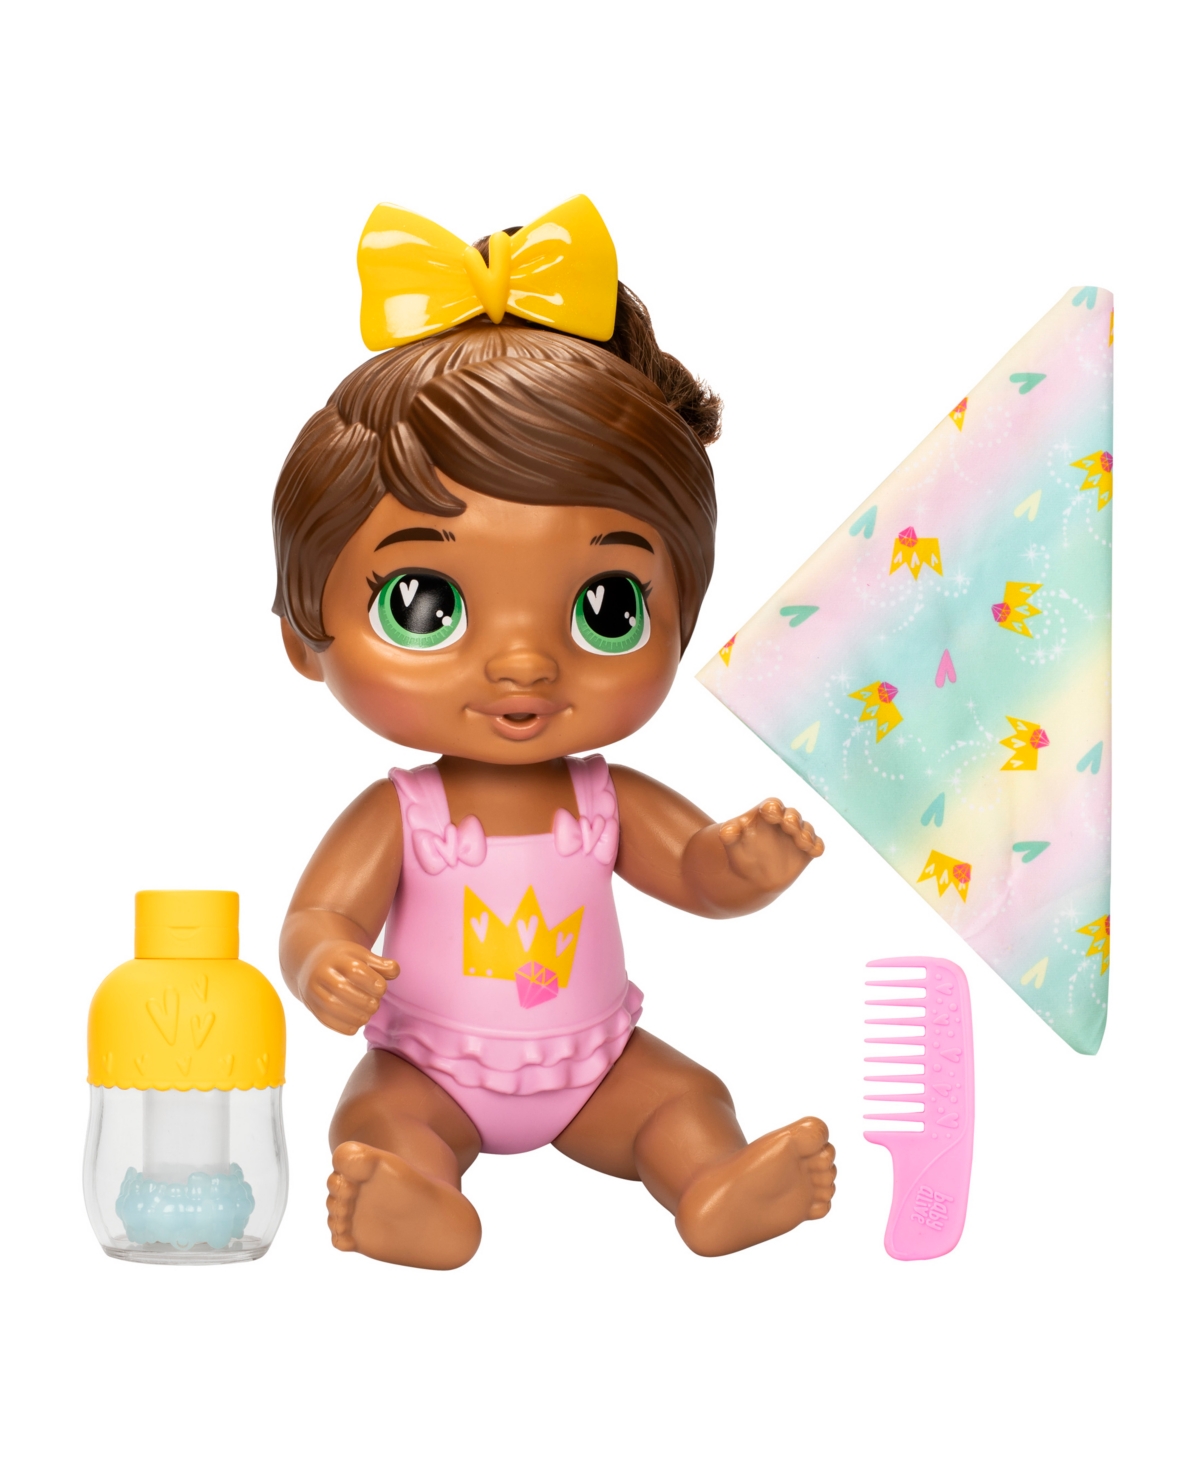 Shop Baby Alive Shampoo Snuggle Sophia Sparkle Doll Playset In No Color